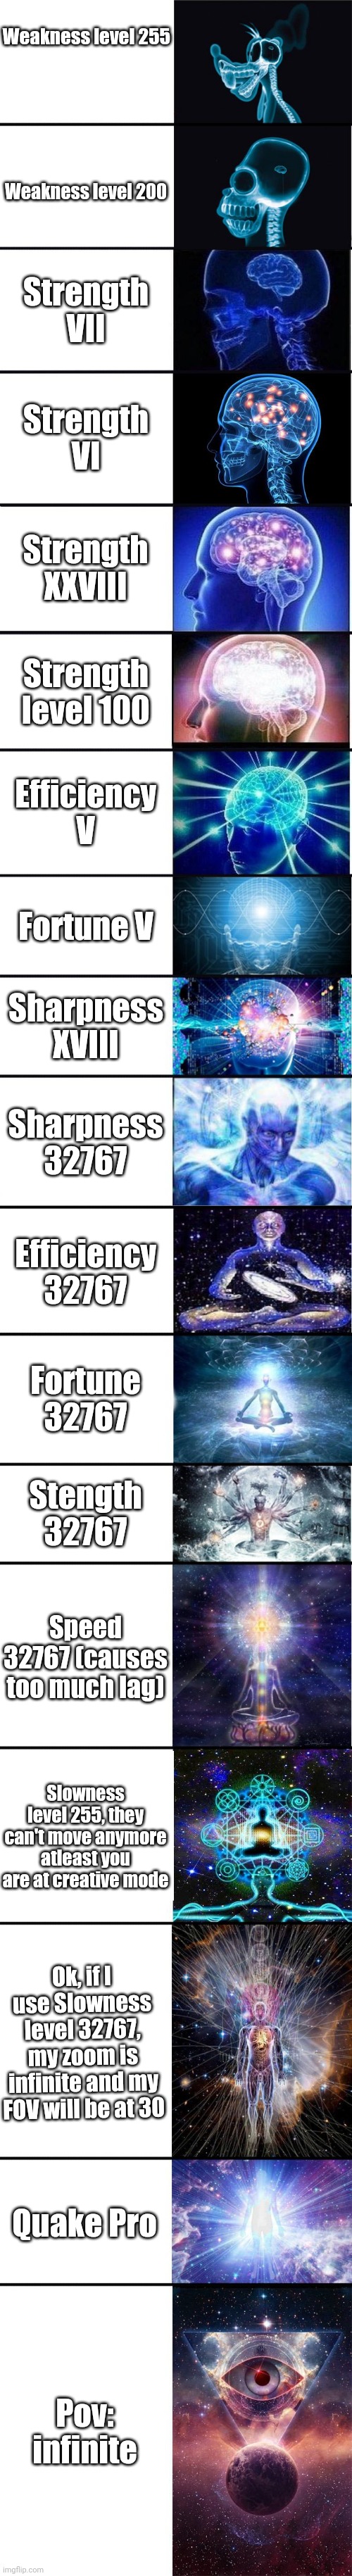 Which level of effects are you? | Weakness level 255; Weakness level 200; Strength VII; Strength VI; Strength XXVIII; Strength level 100; Efficiency V; Fortune V; Sharpness XVIII; Sharpness 32767; Efficiency 32767; Fortune 32767; Stength 32767; Speed 32767 (causes too much lag); Slowness level 255, they can't move anymore atleast you are at creative mode; Ok, if I use Slowness level 32767, my zoom is infinite and my FOV will be at 30; Quake Pro; Pov: infinite | image tagged in expanding brain 9001 | made w/ Imgflip meme maker